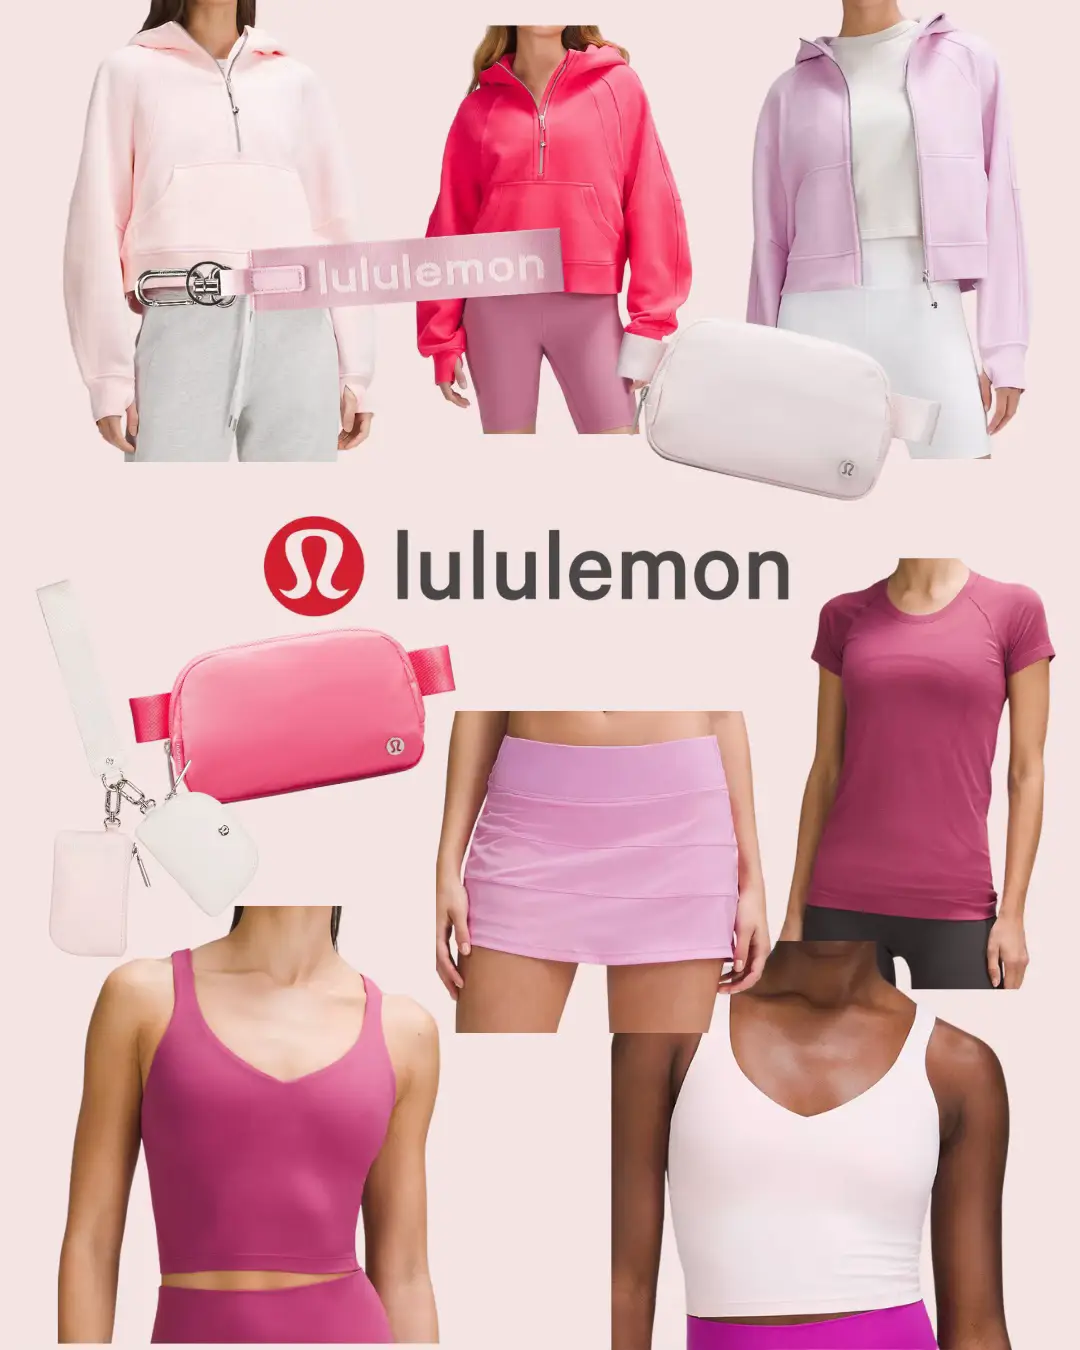 Lululemon color comparison, Gallery posted by Alexandra ☁️🌸